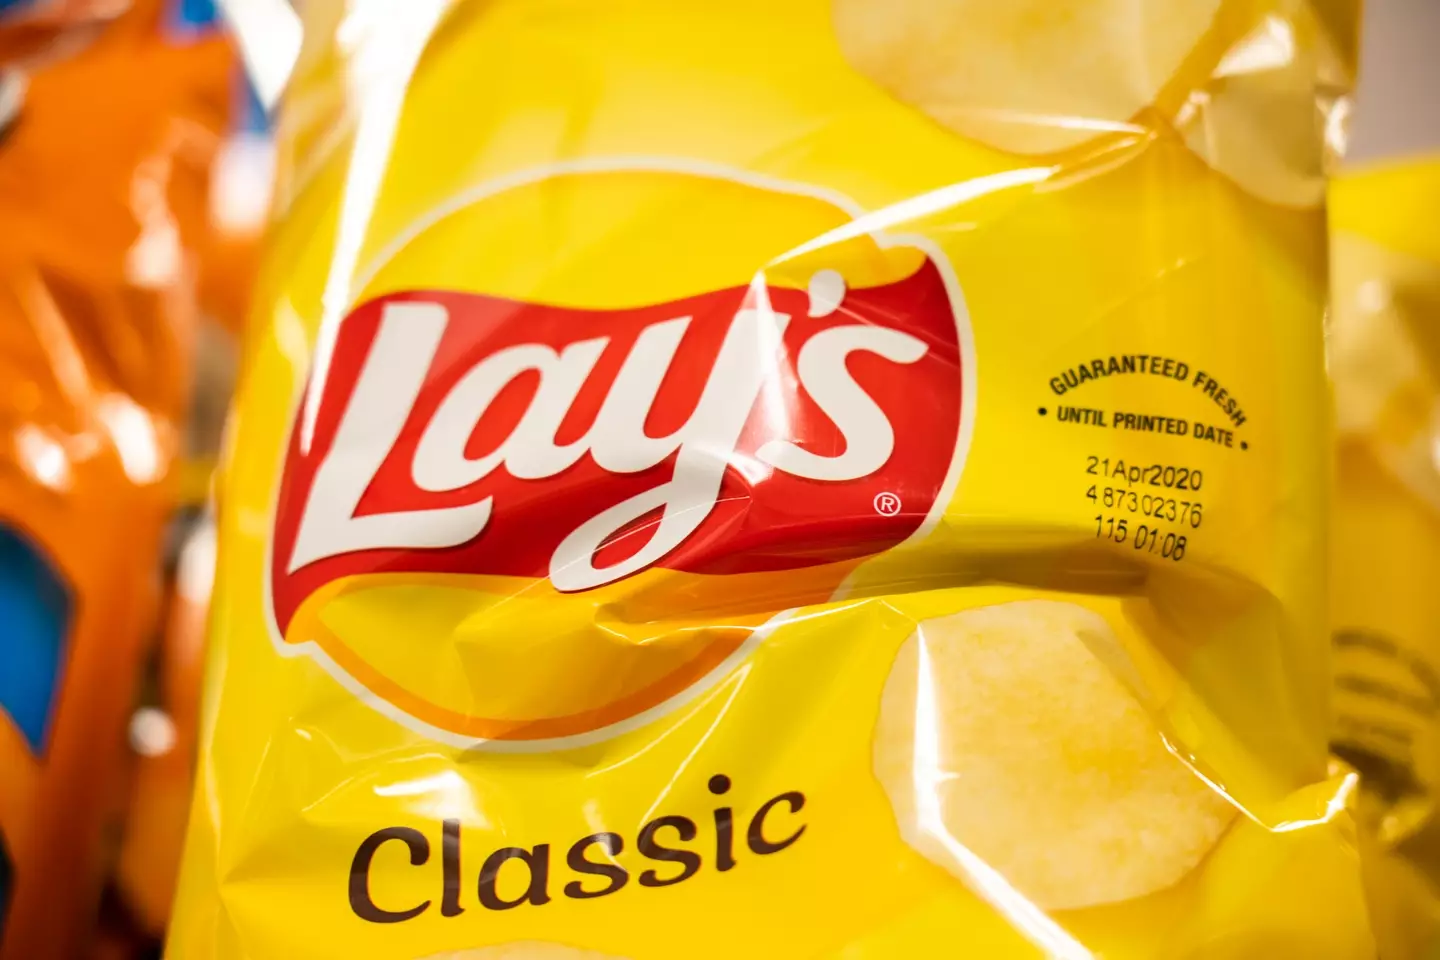 Despite sporting the same logo, crisps in foreign countries display the Lays name instead.